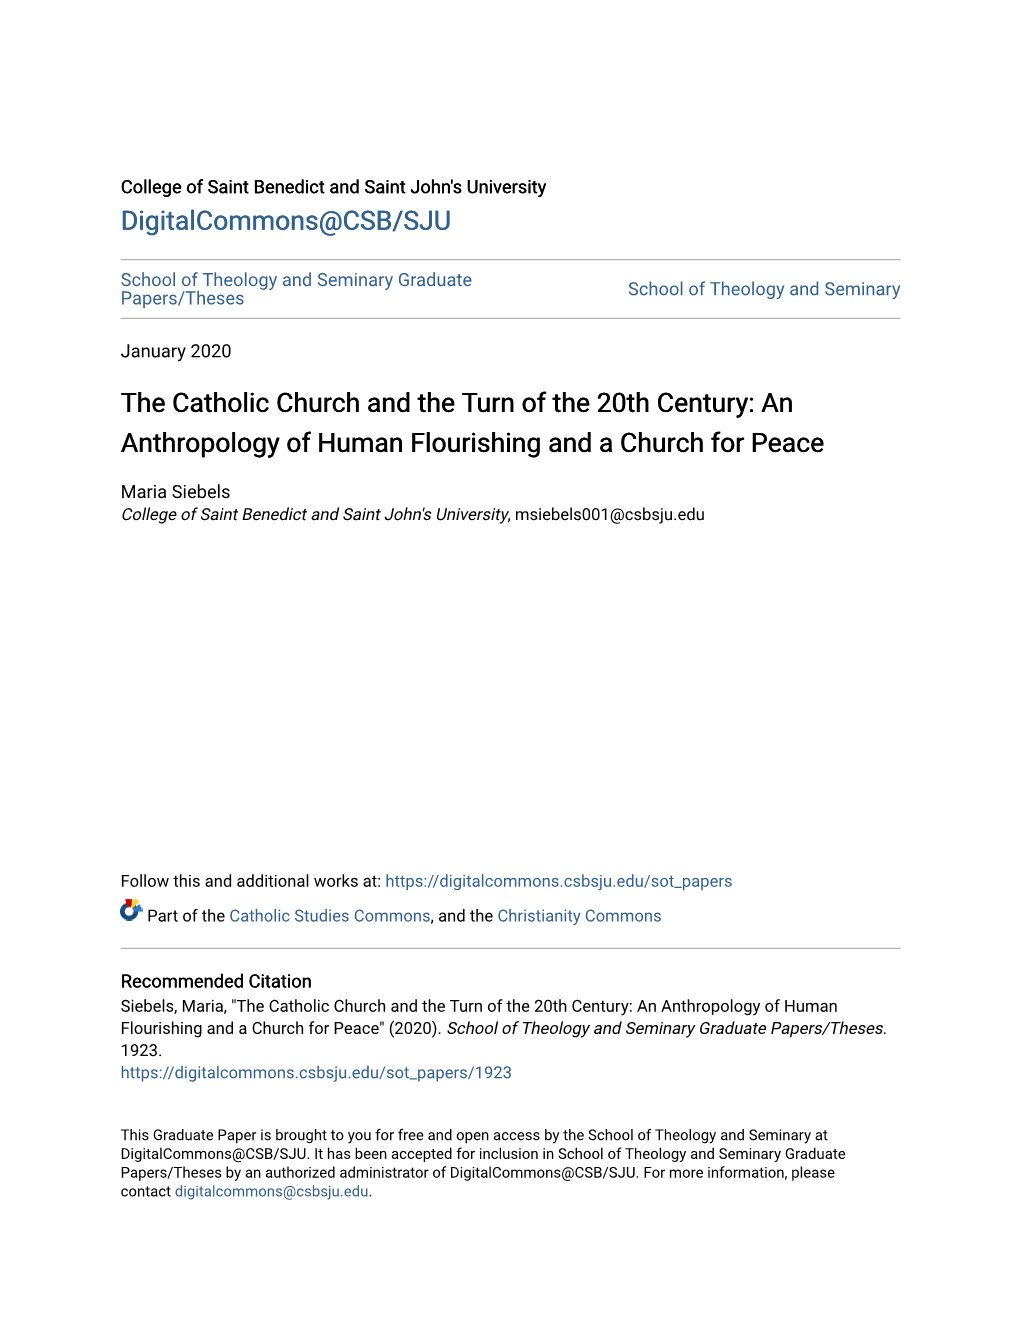 The Catholic Church and the Turn of the 20Th Century: an Anthropology of Human Flourishing and a Church for Peace